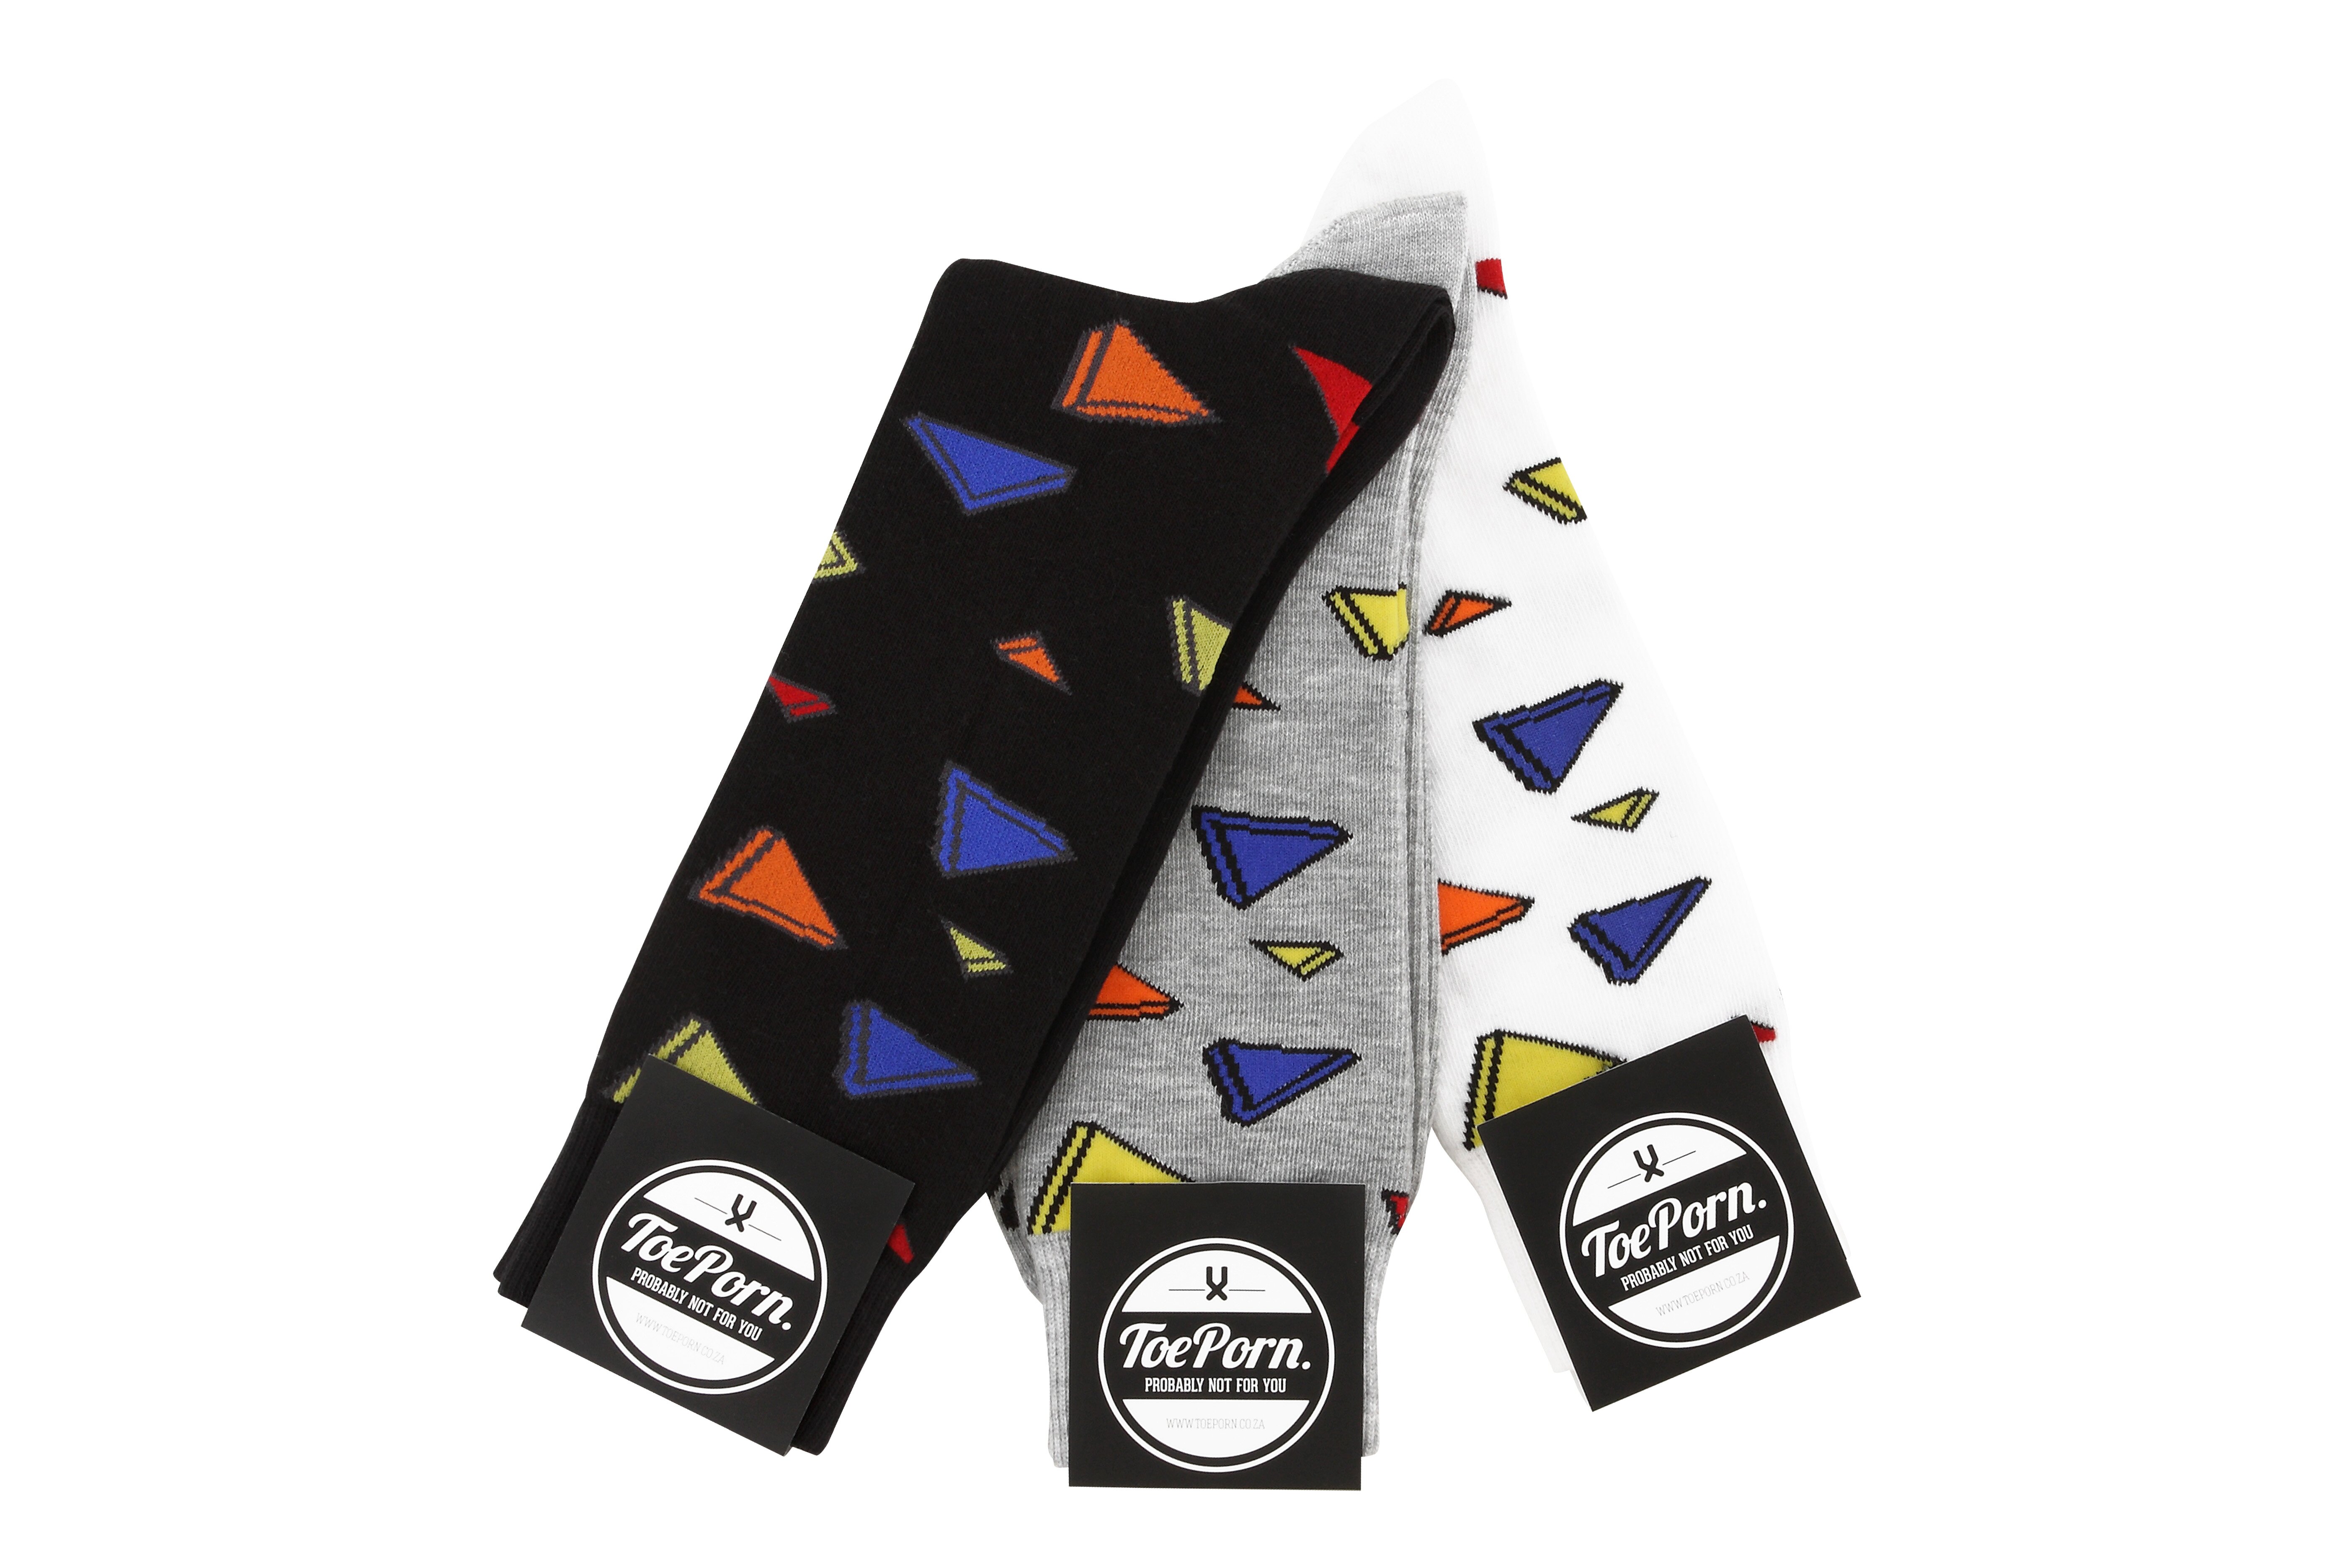 Tina Triangle ToePorn socks available in Black, Light Grey Melange and White R90 each